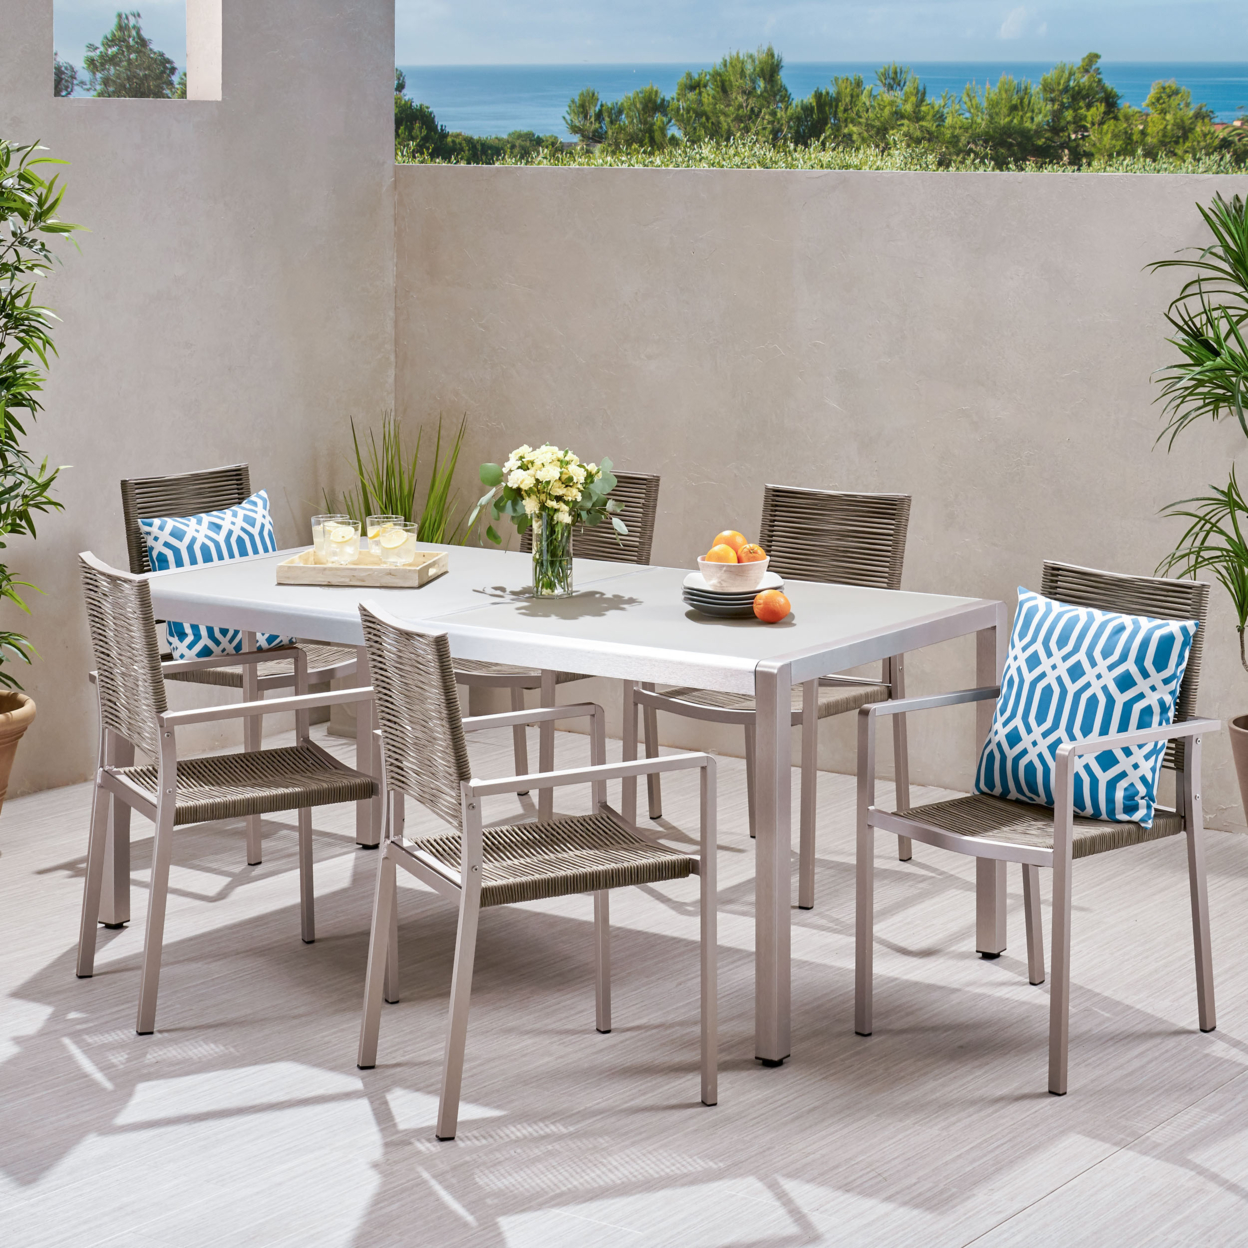 Sandy Outdoor Modern 6 Seater Aluminum Dining Set With Tempered Glass Table Top - Gun Metal Gray + Dark Gray + Black